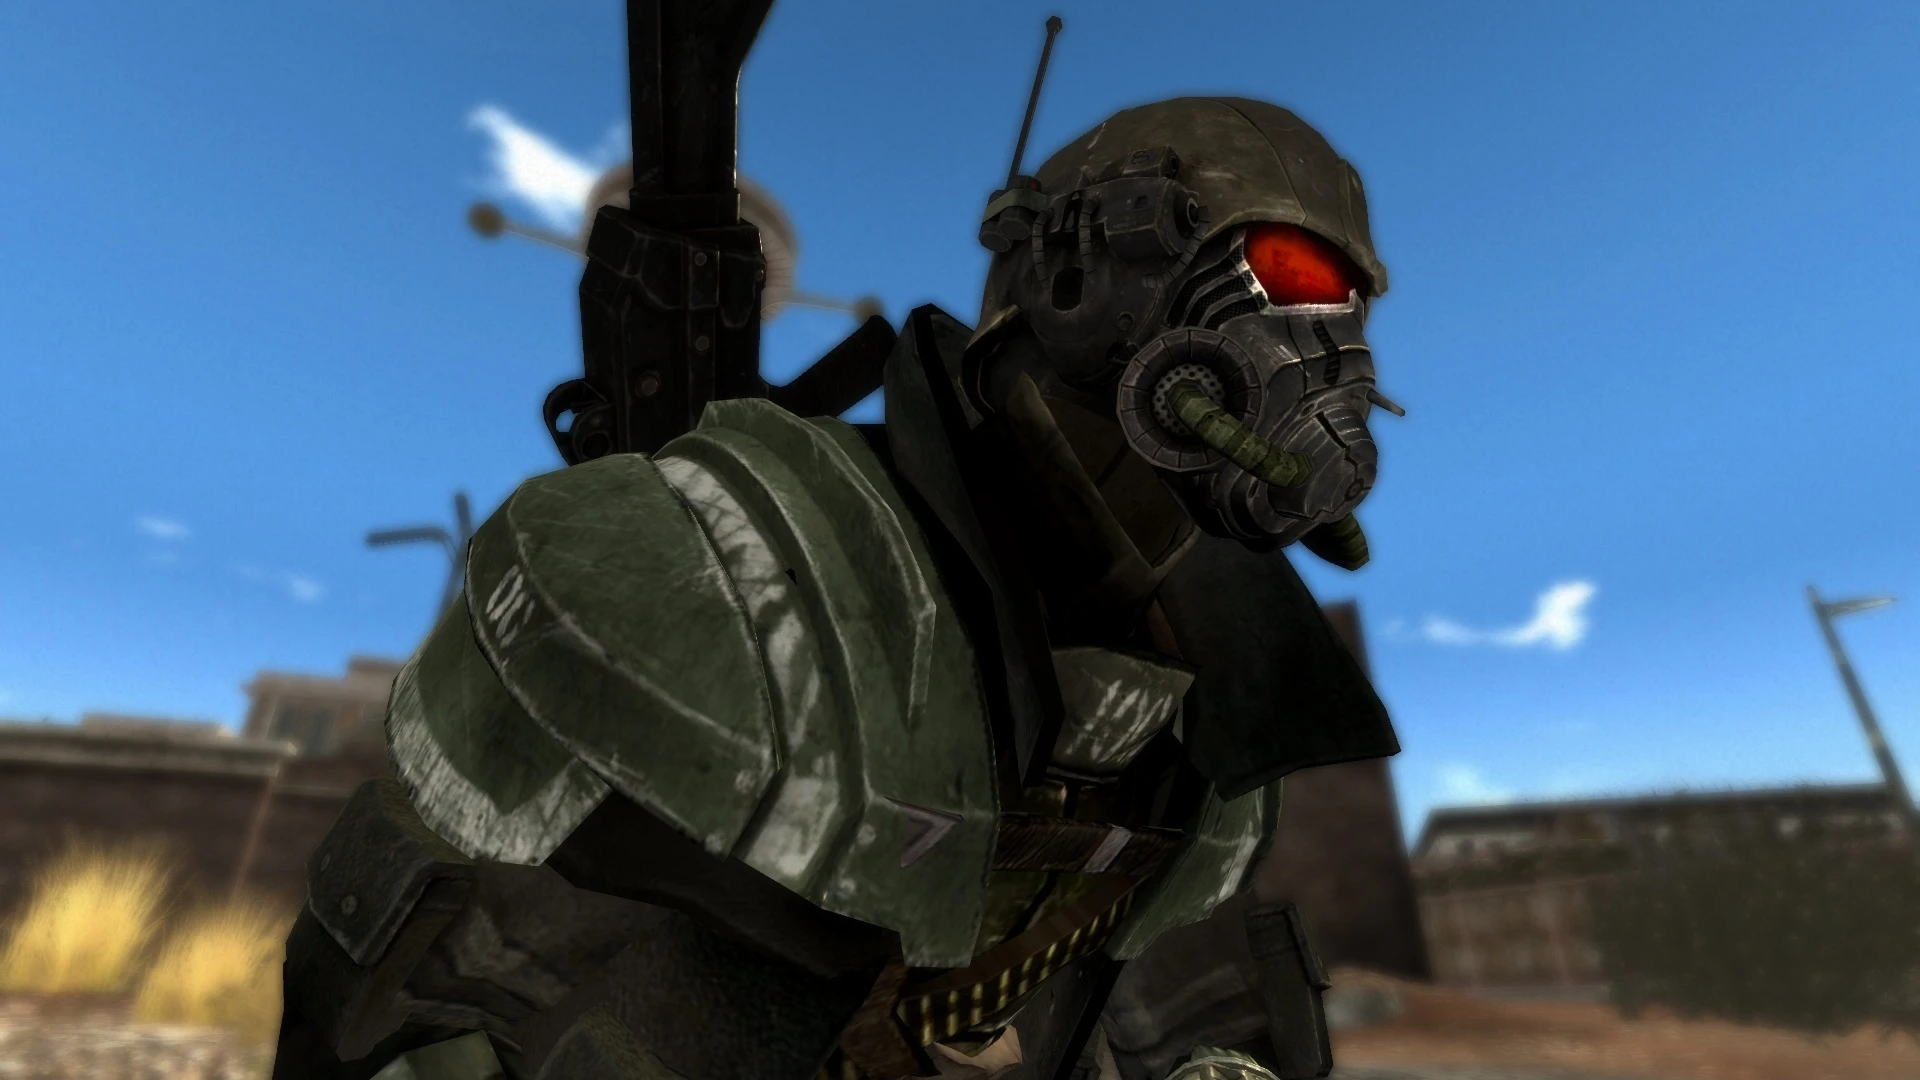 Ncr Elite Riot Armor 2 At Fallout 4 Nexus Mods And Community